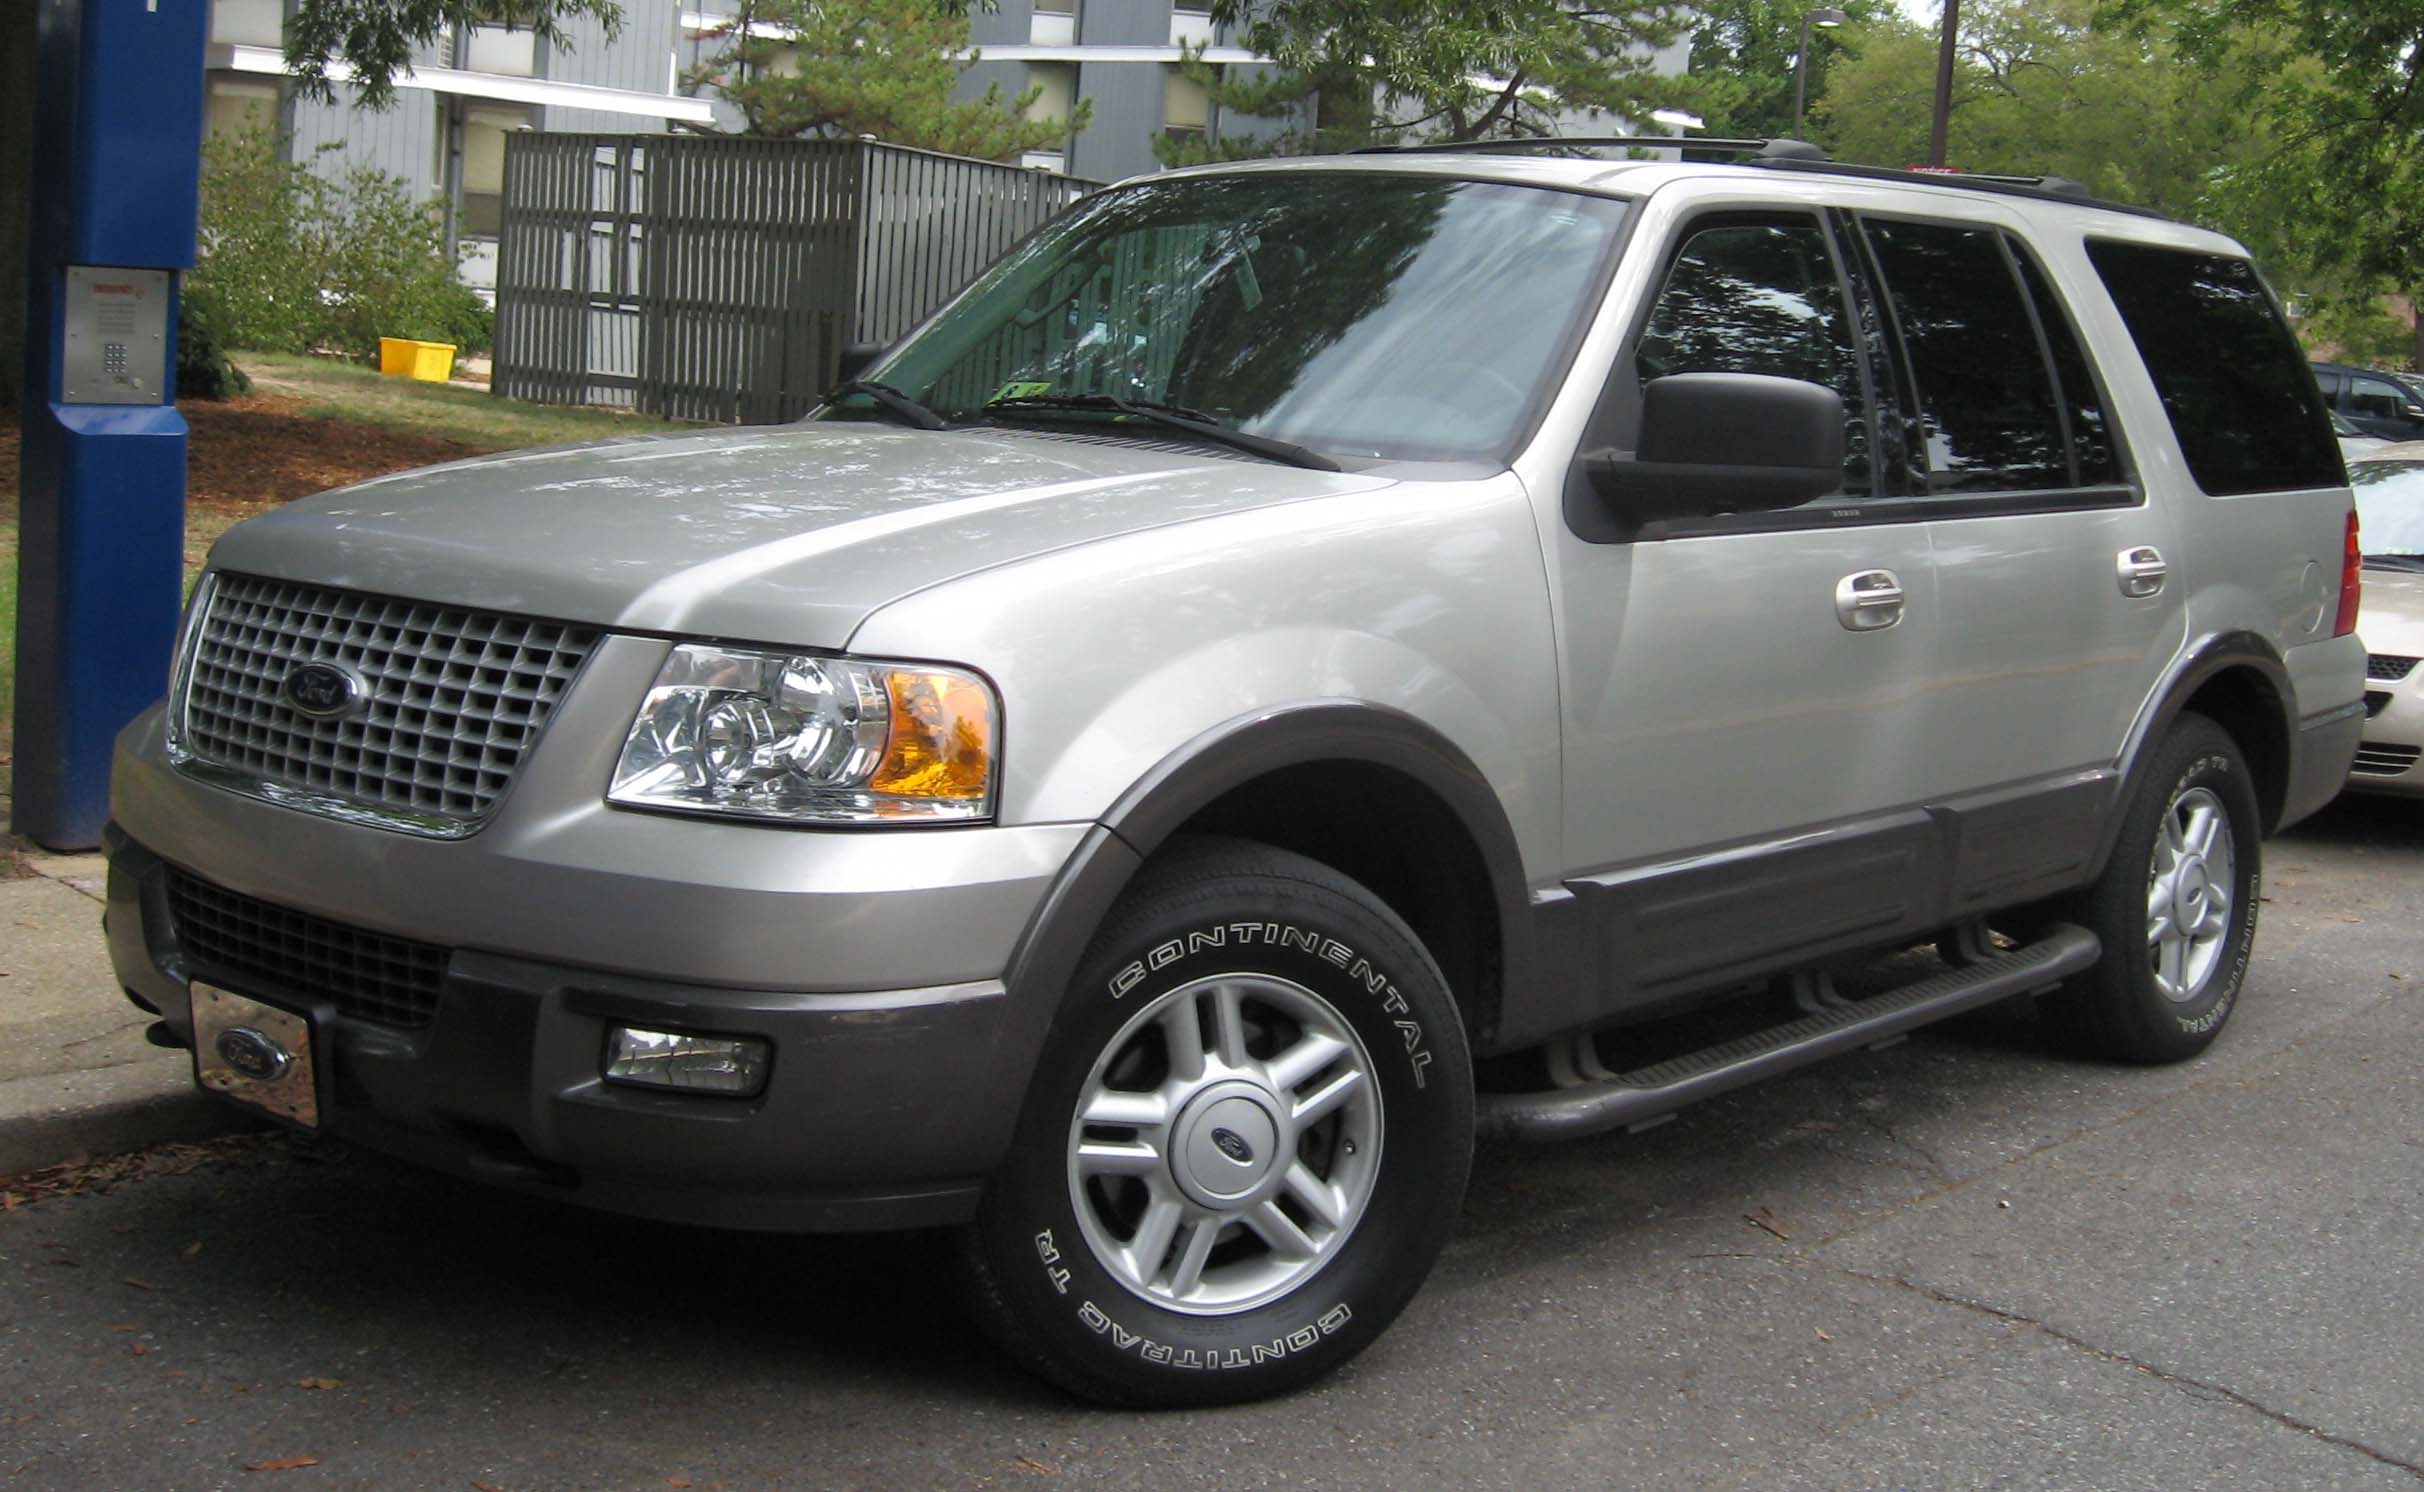 2003 Expedition ford recall #5